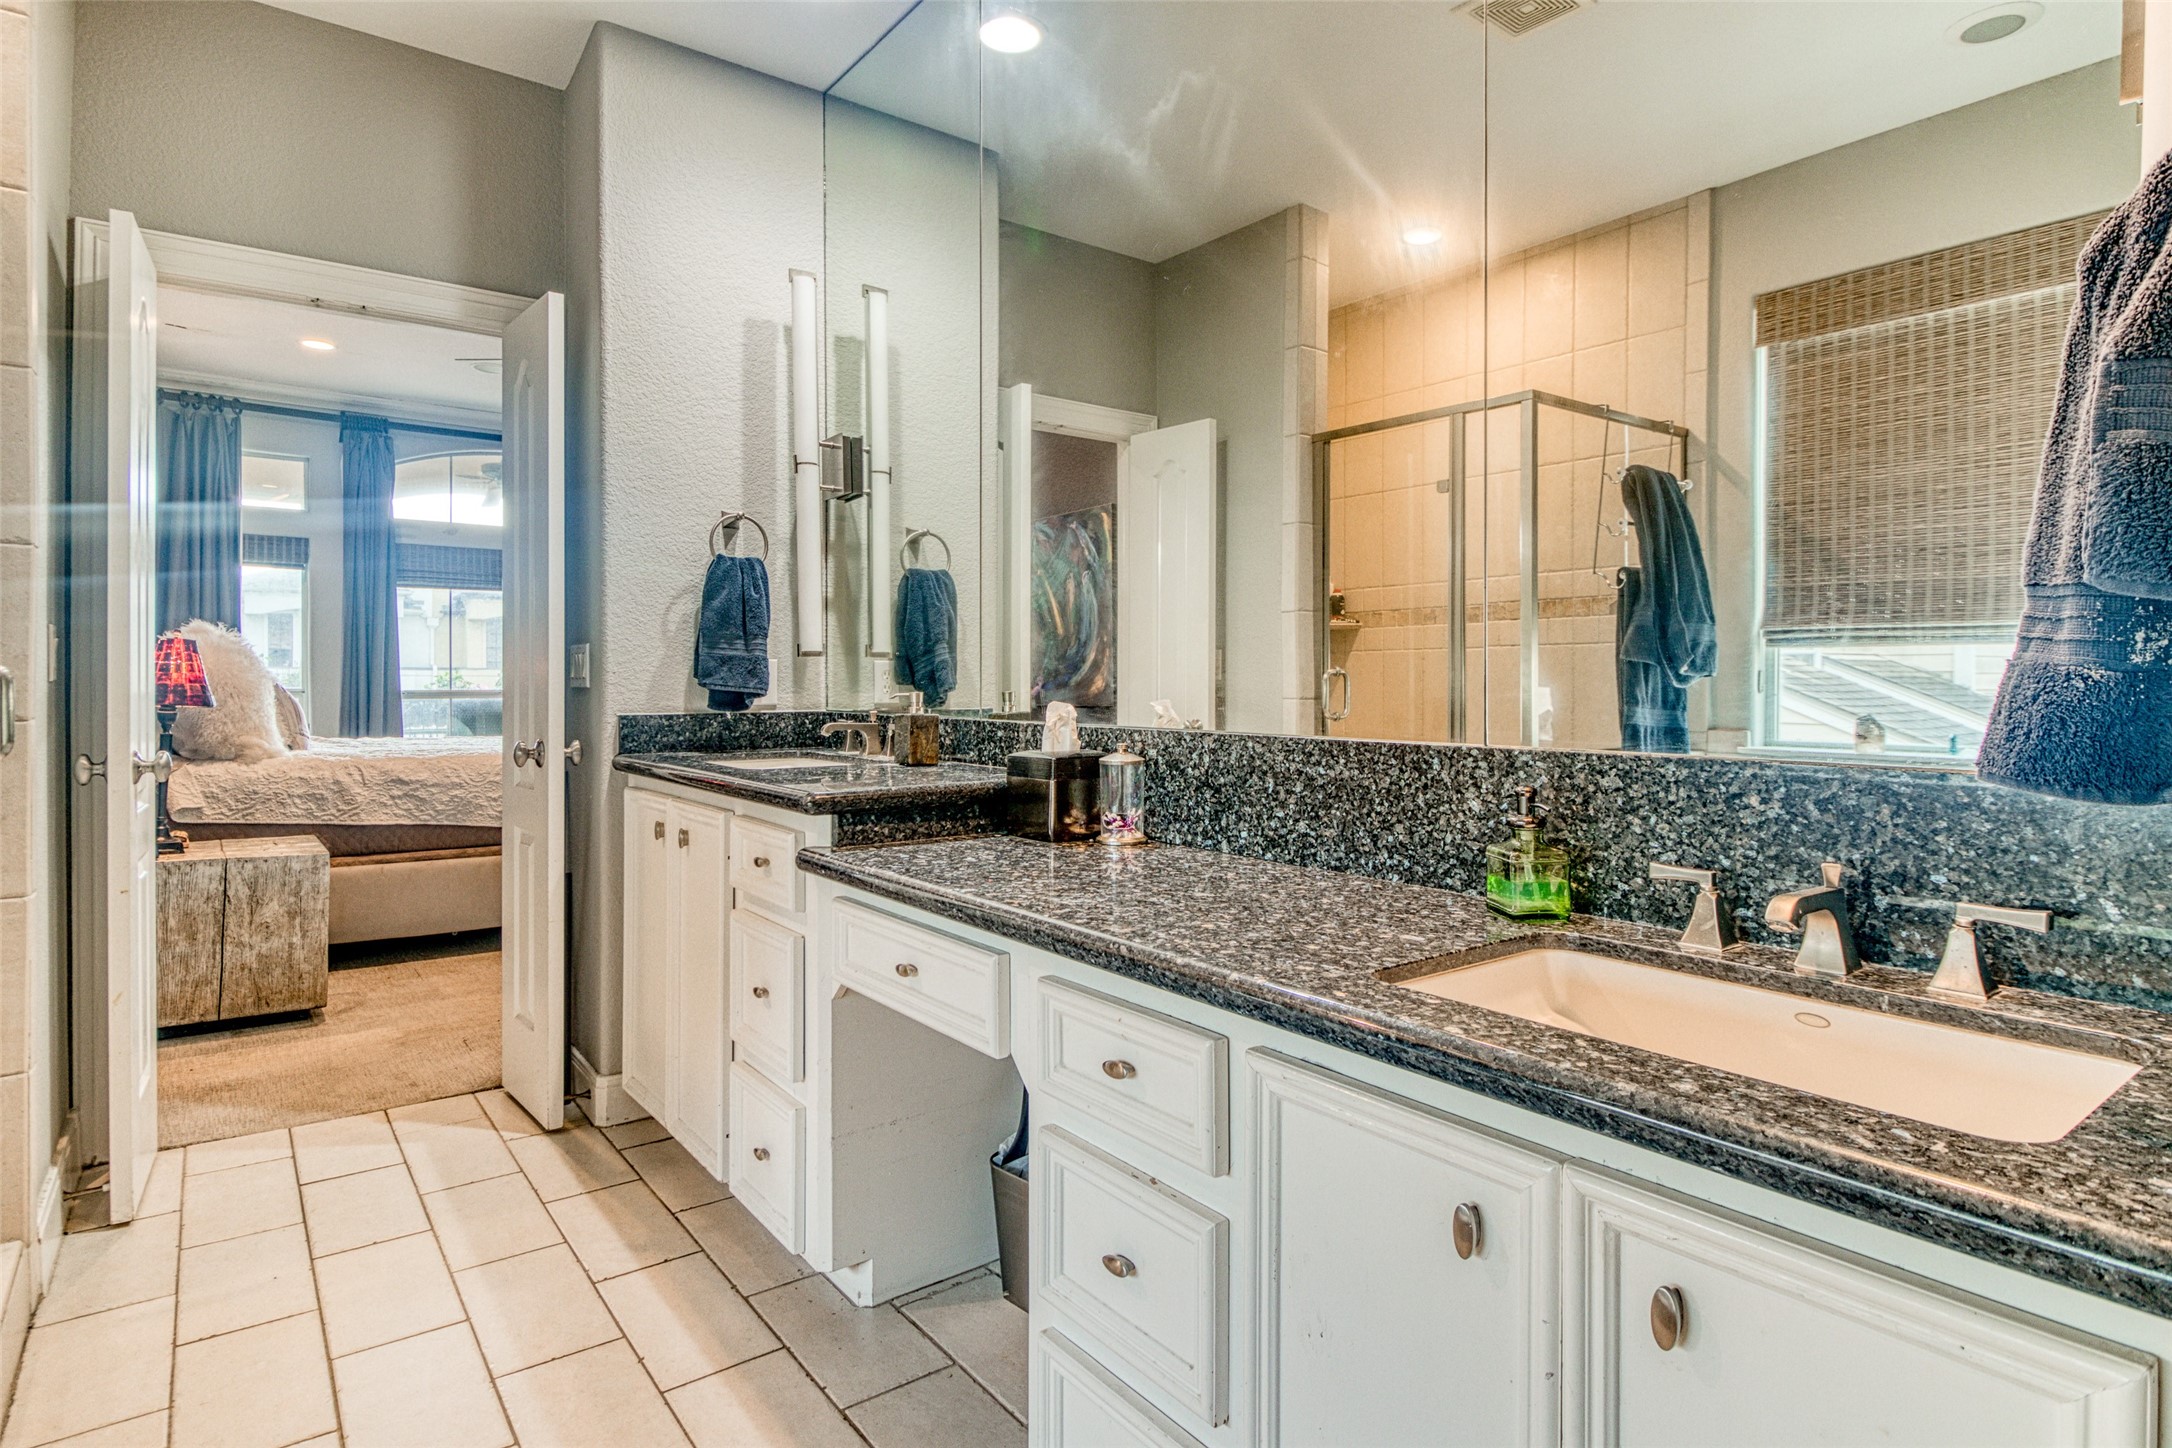 This alternate view of the primary bathroom provides a glance at the separate glass-encased walk-in shower with floor-to-ceiling porcelain tile surround and built-in bench.  Note the dual-height vanities and the seating area for make-up in between.  Truly a homeowner's retreat!